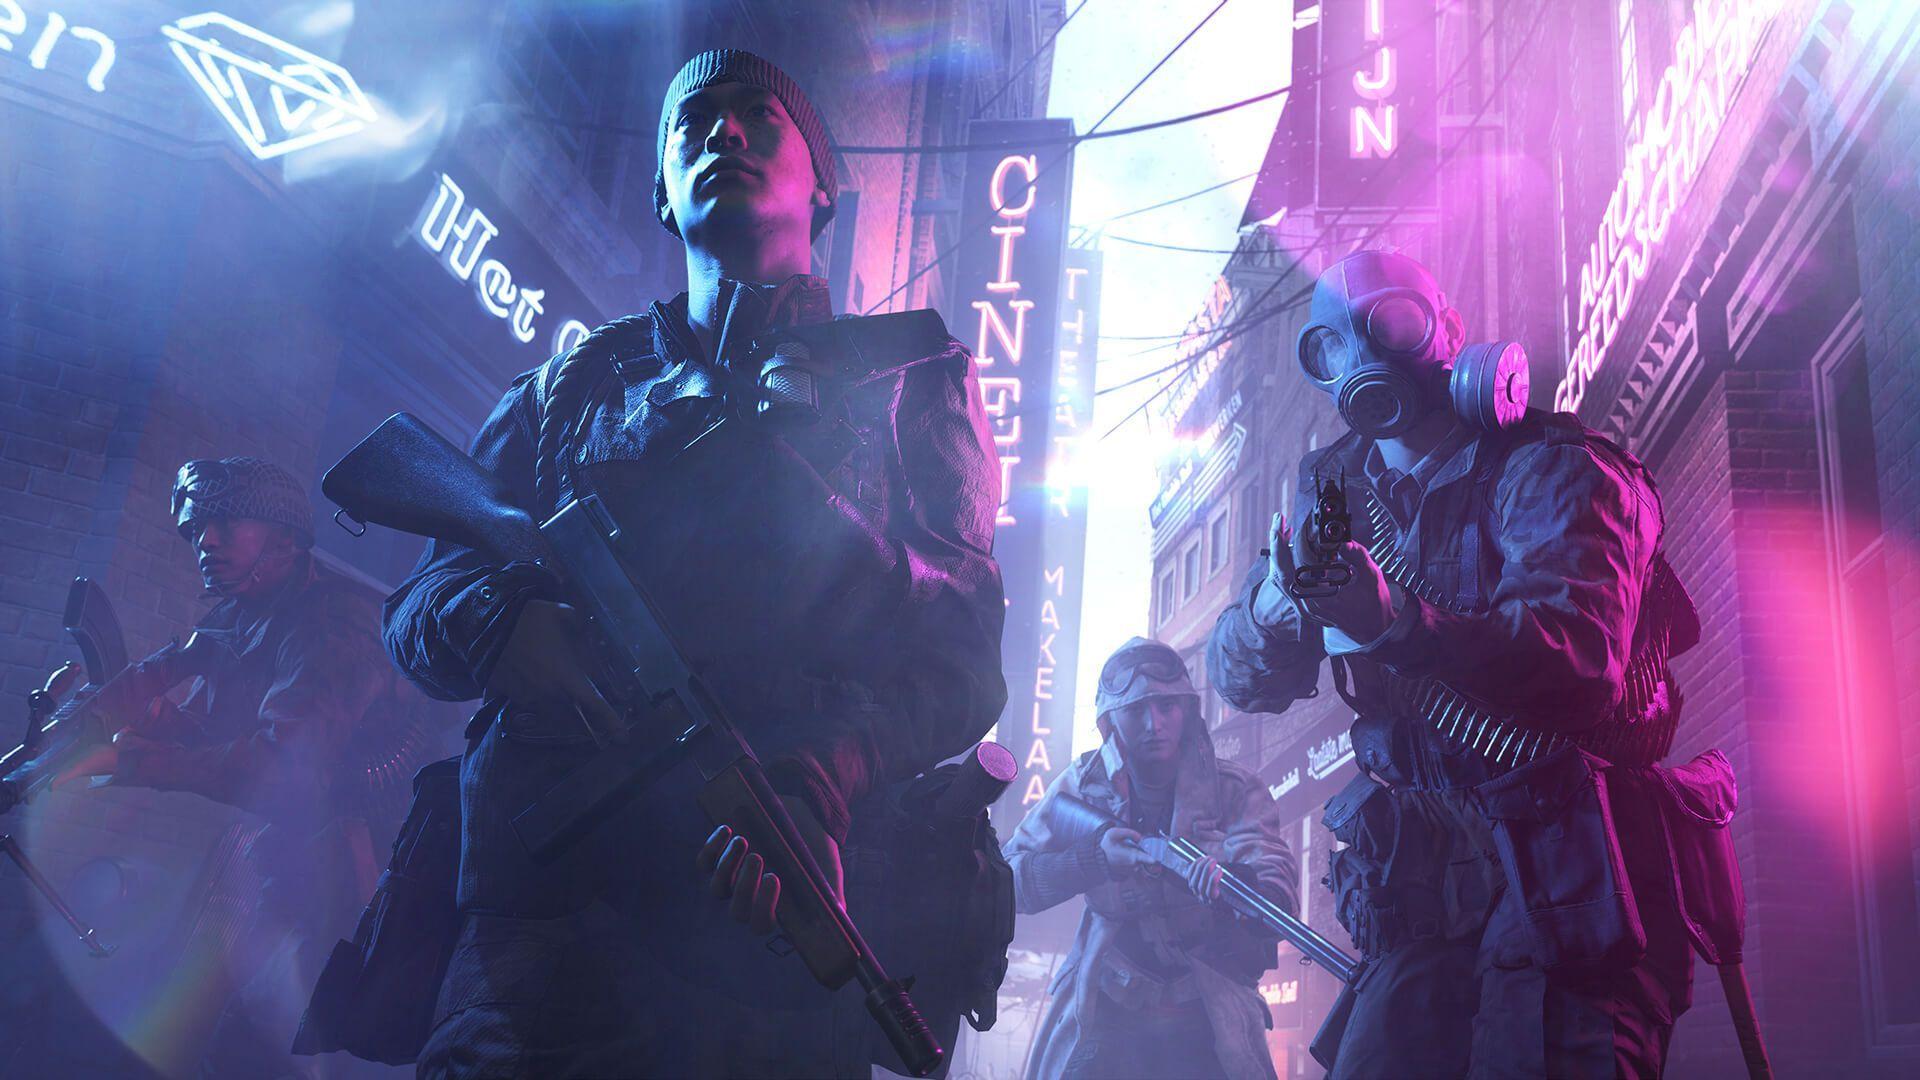 Battlefield V' release date delayed from October 19th to November